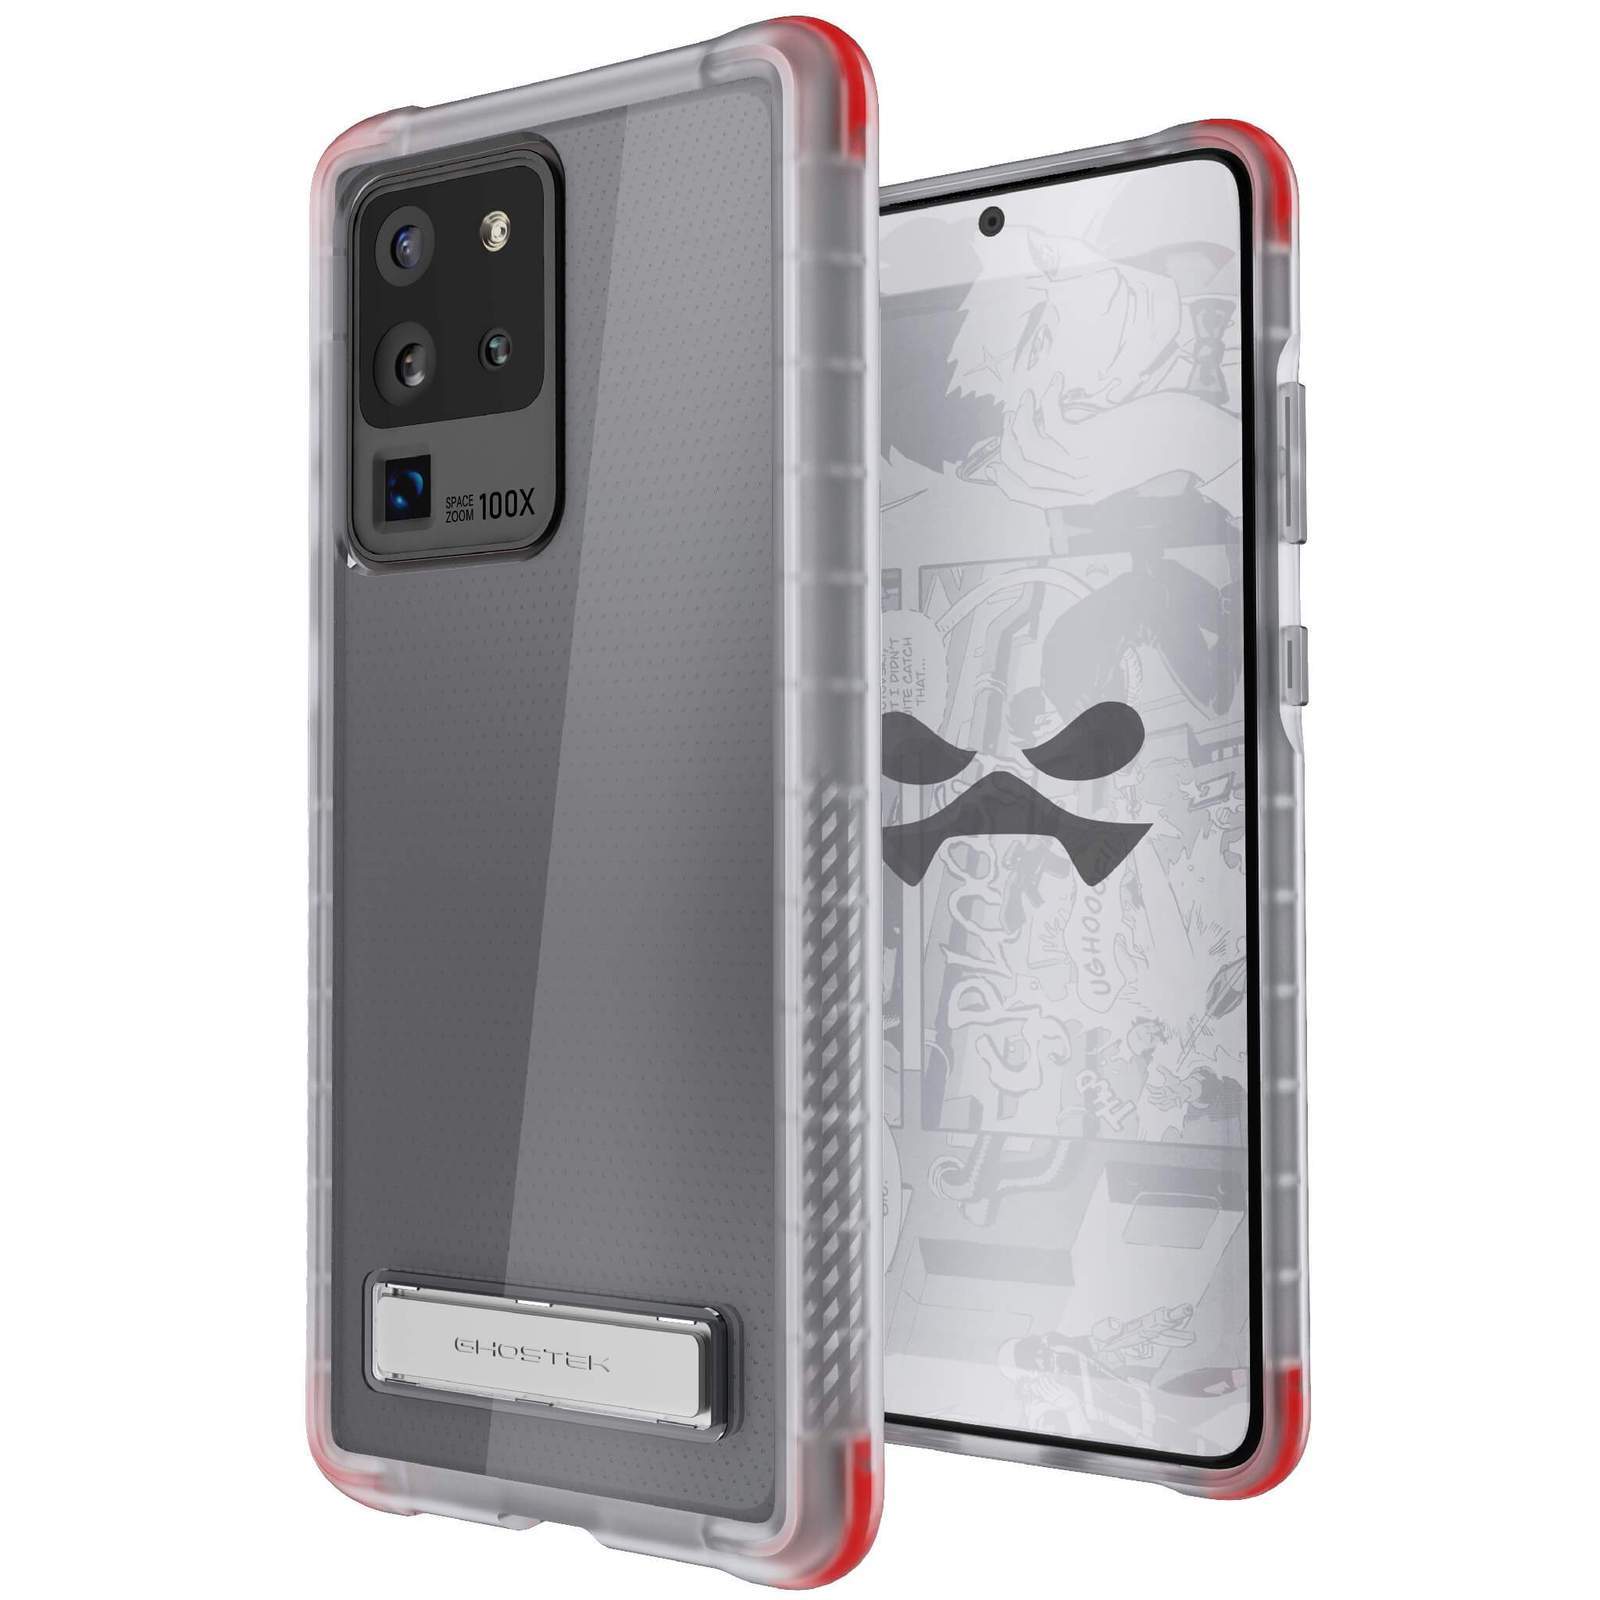 Galaxy S20 Ultra Case — COVERT [Clear]